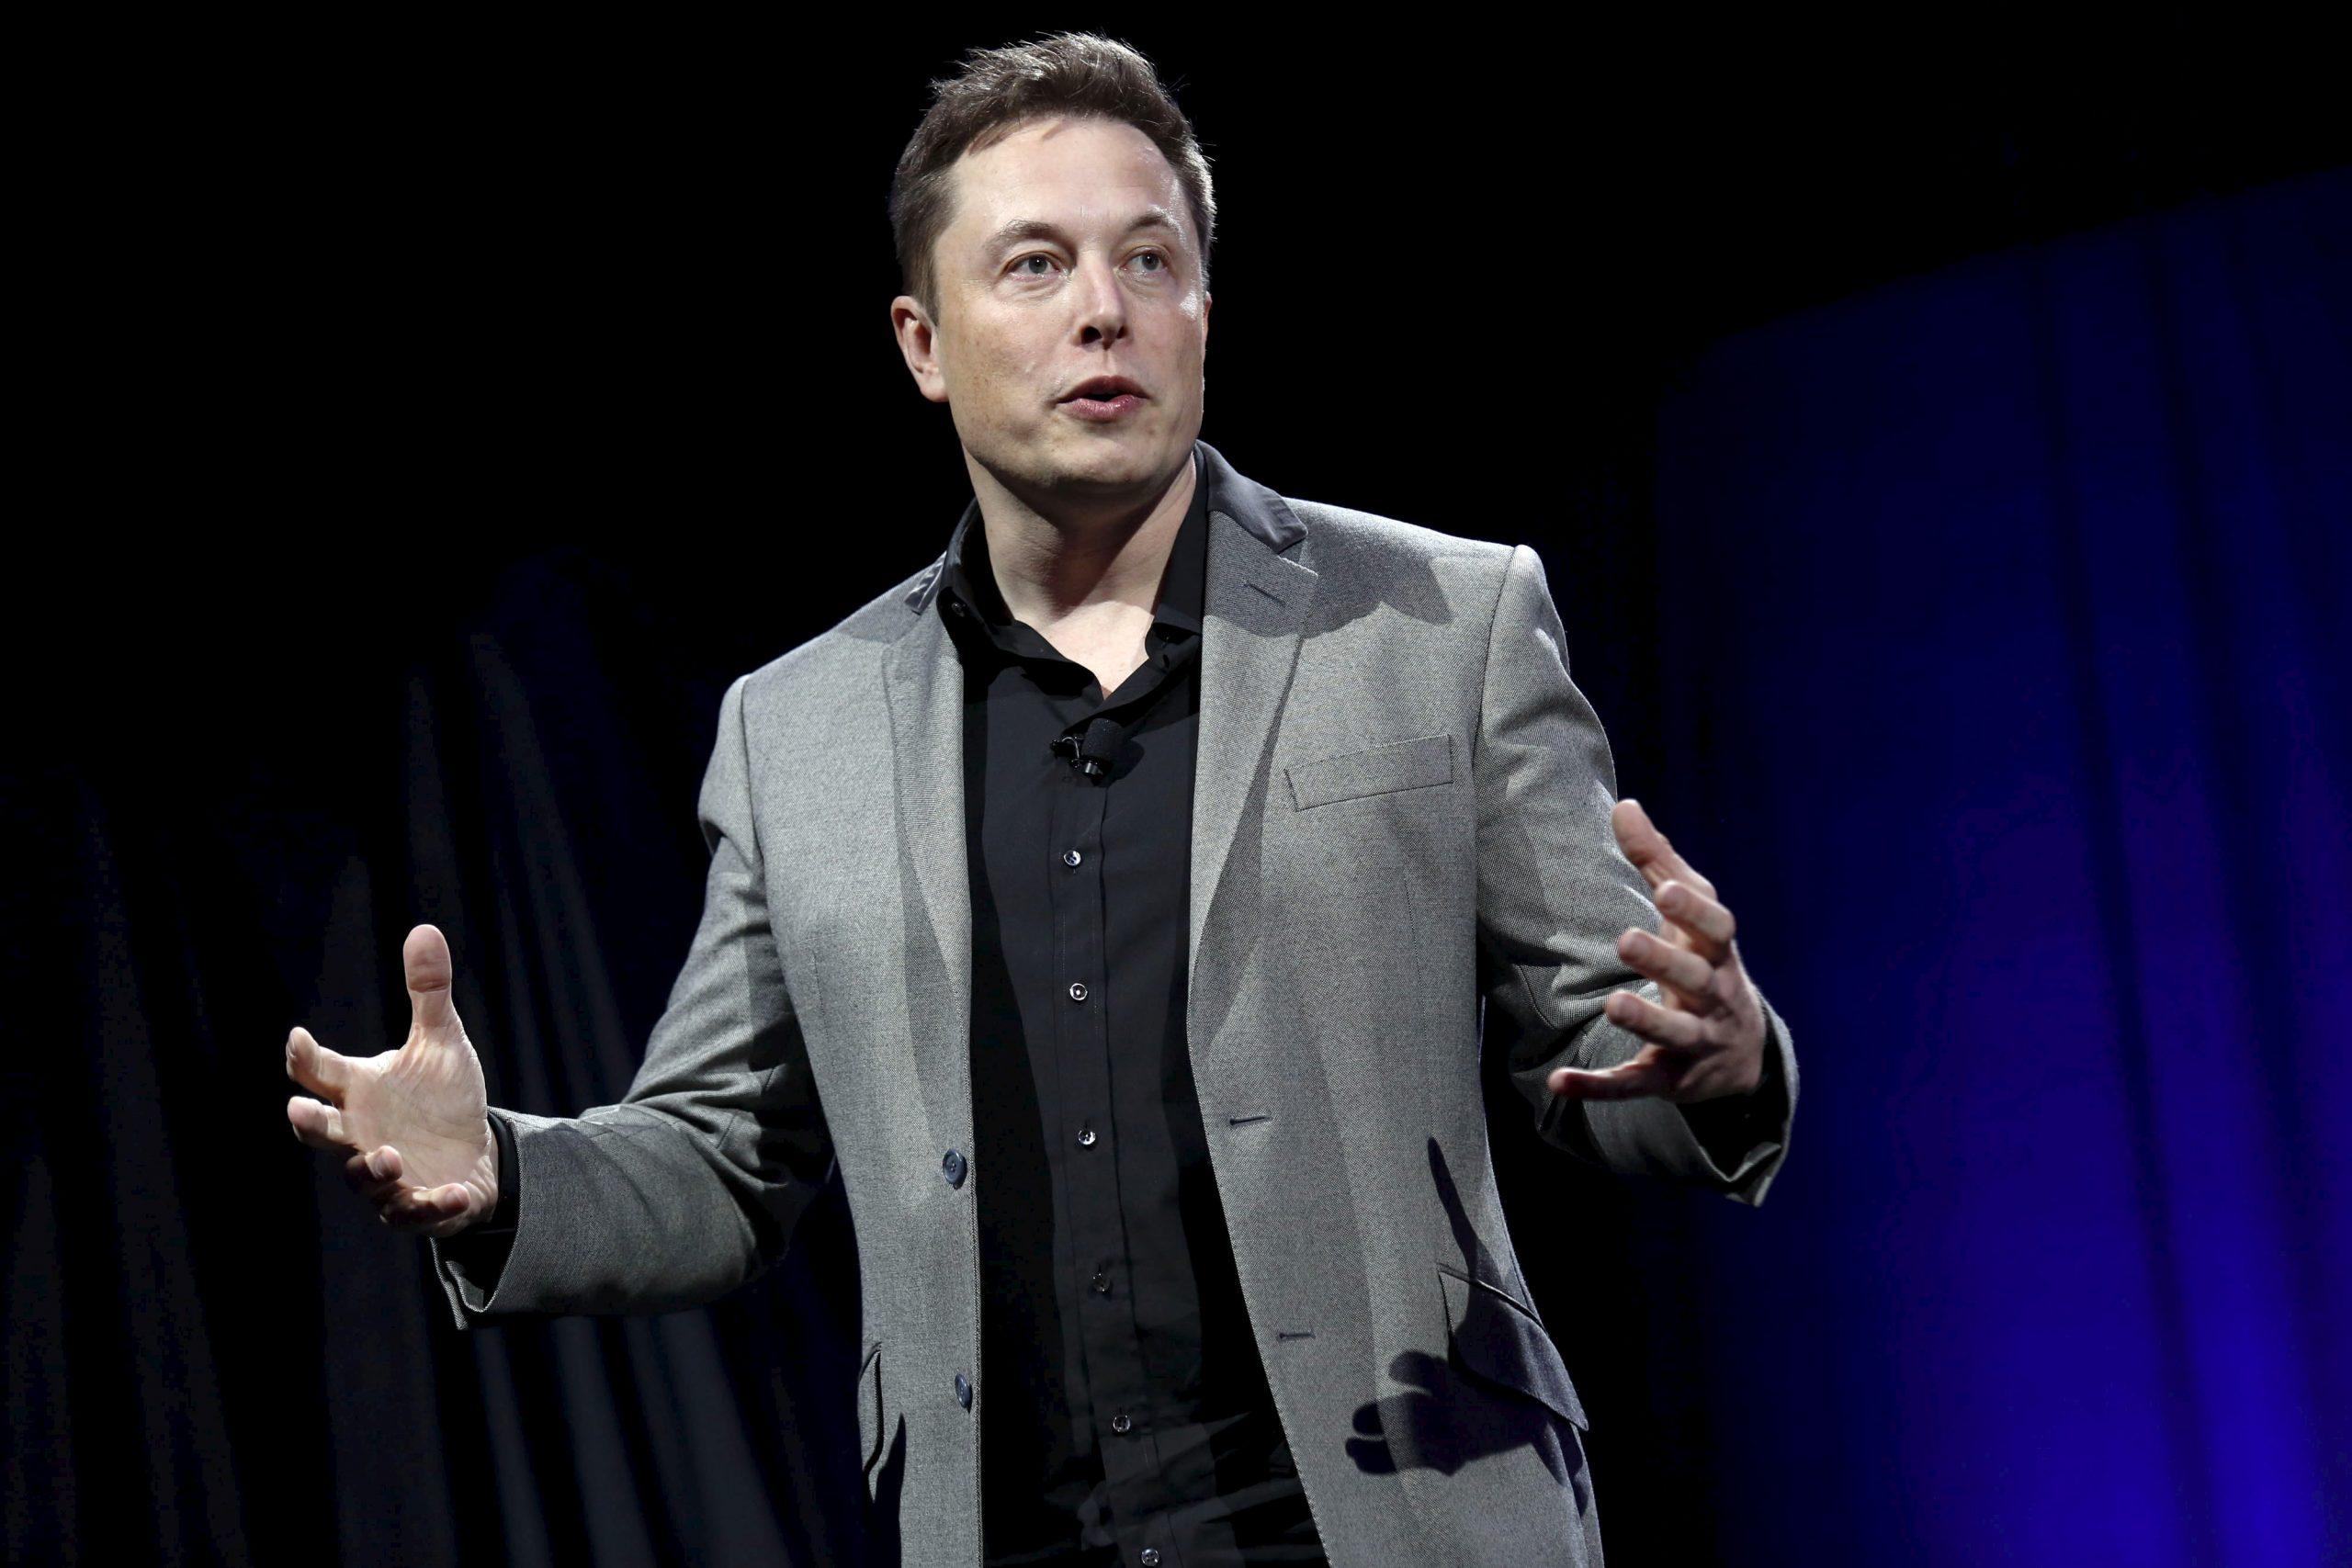 Elon Musk reclaims to the top, becomes richest person on the planet again_40.1